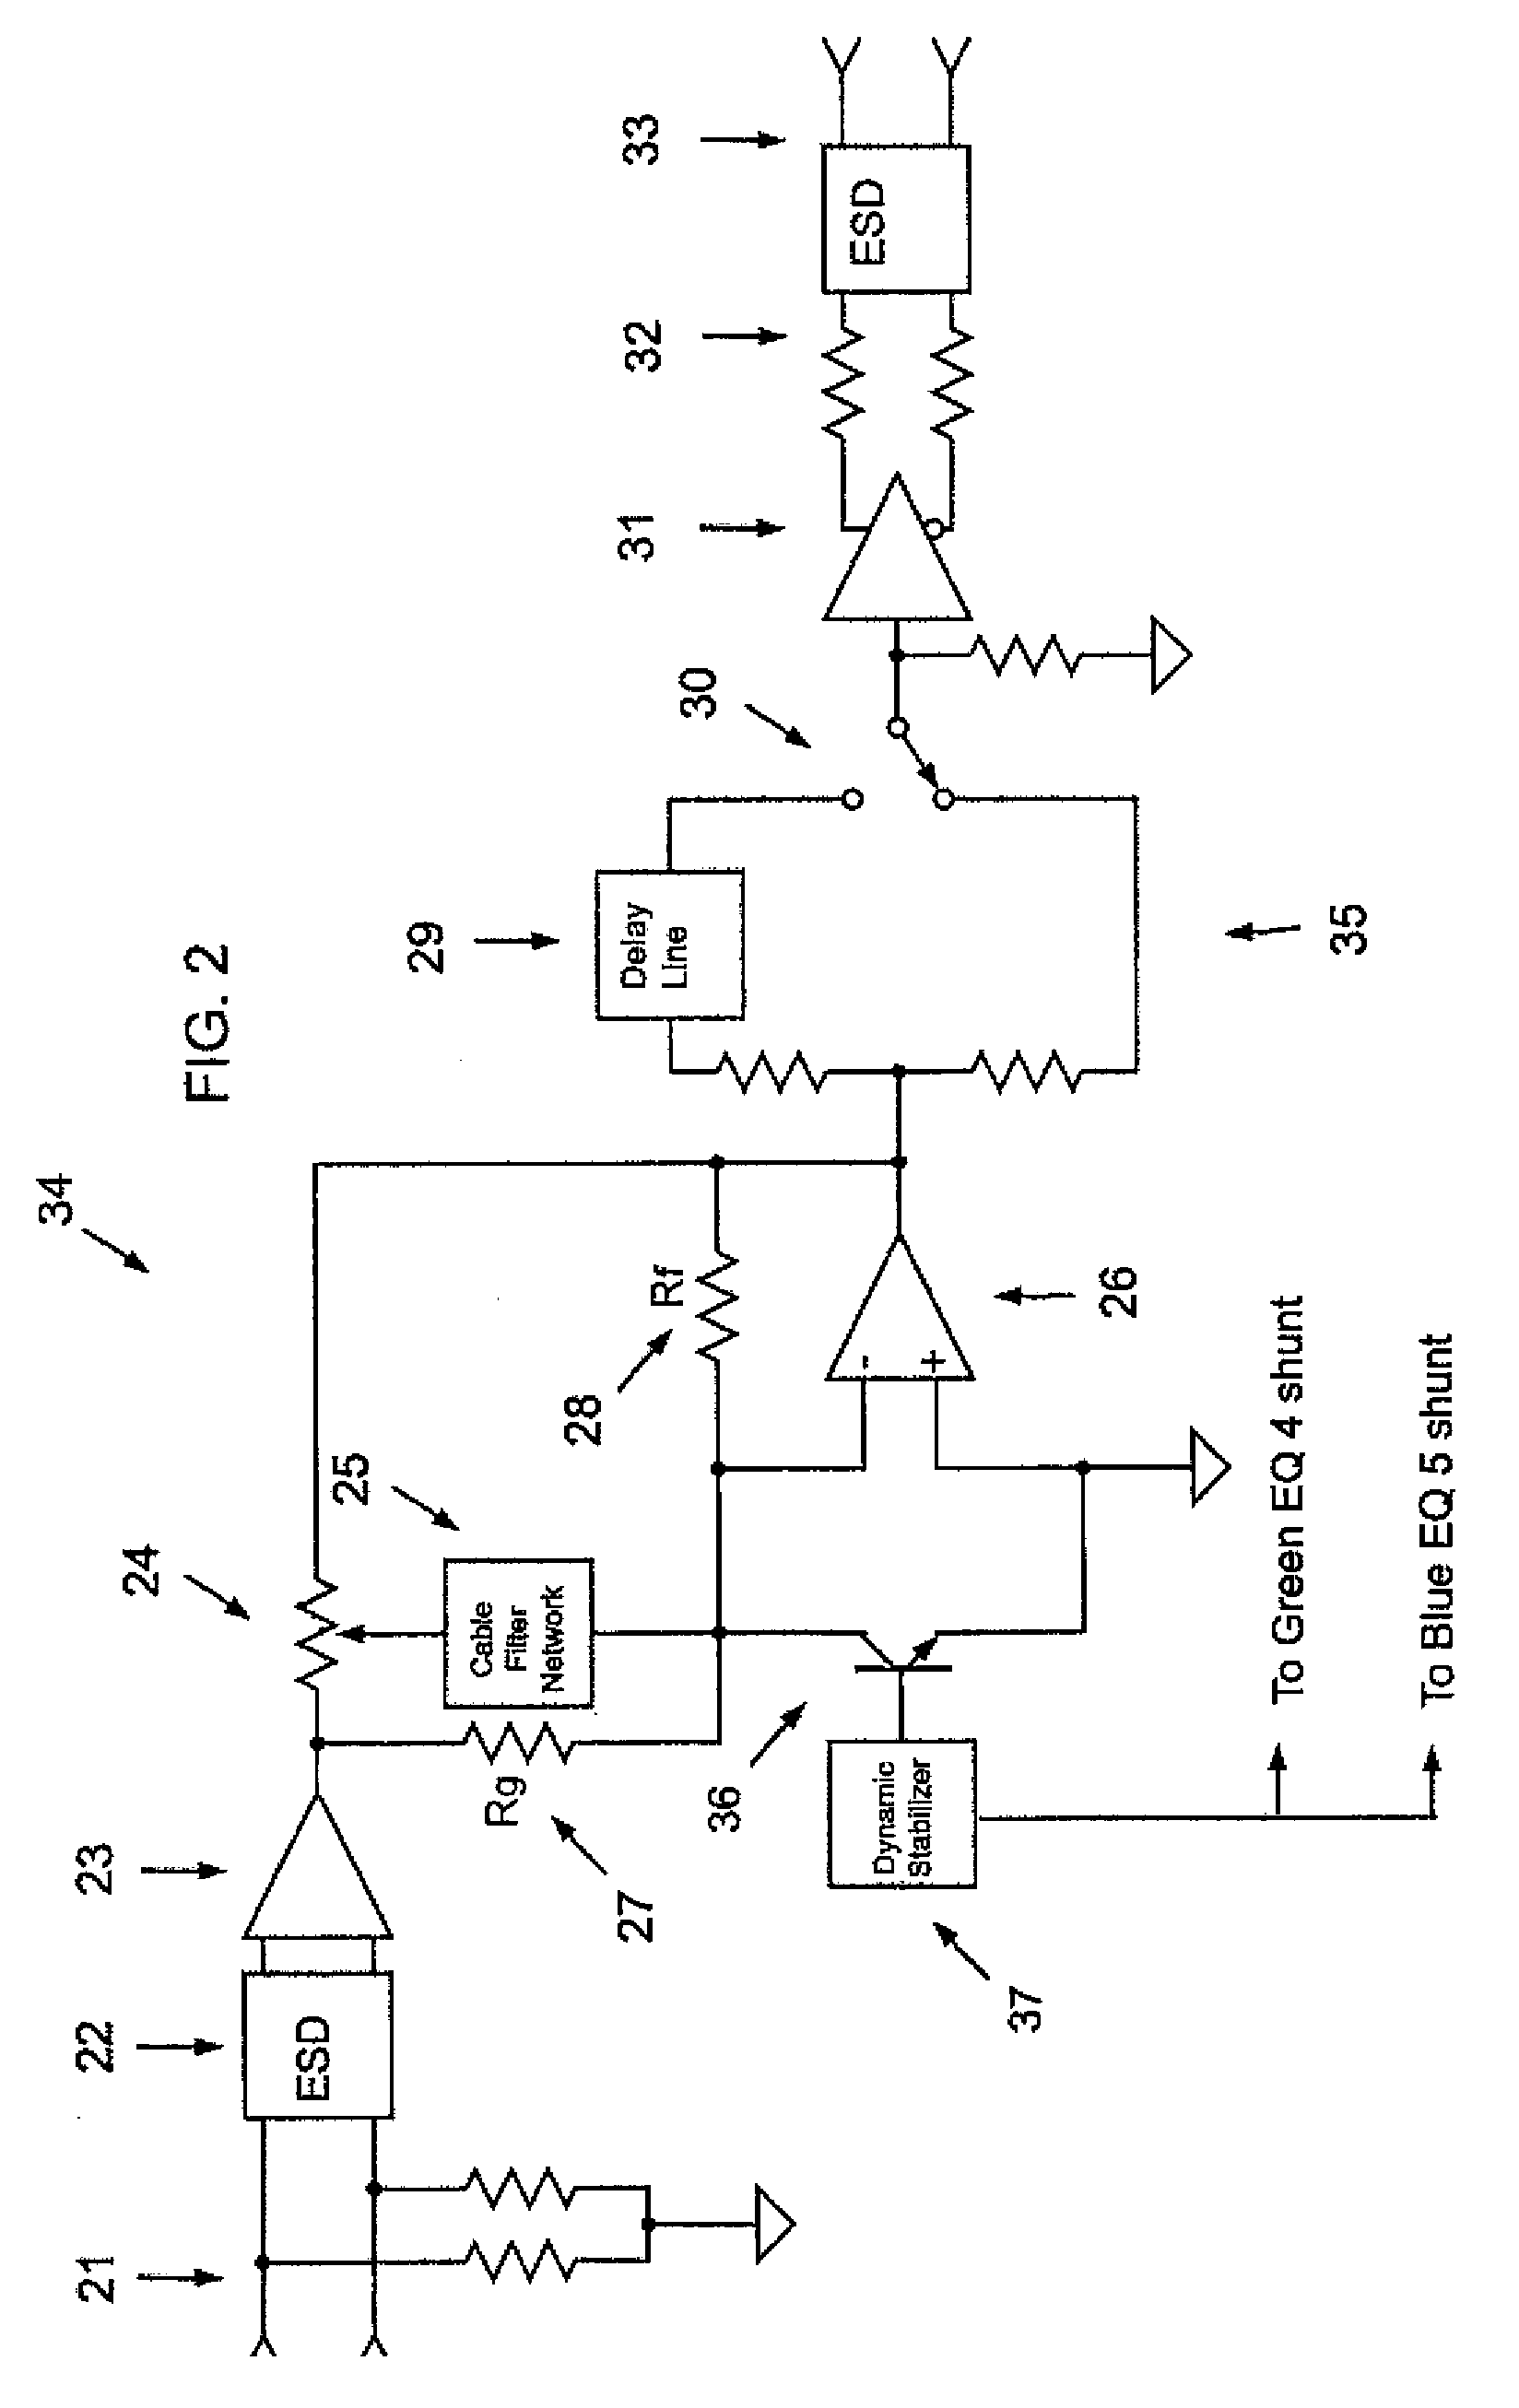 Signal Equalizer for Balanced Transmission Line-Based Video Switching